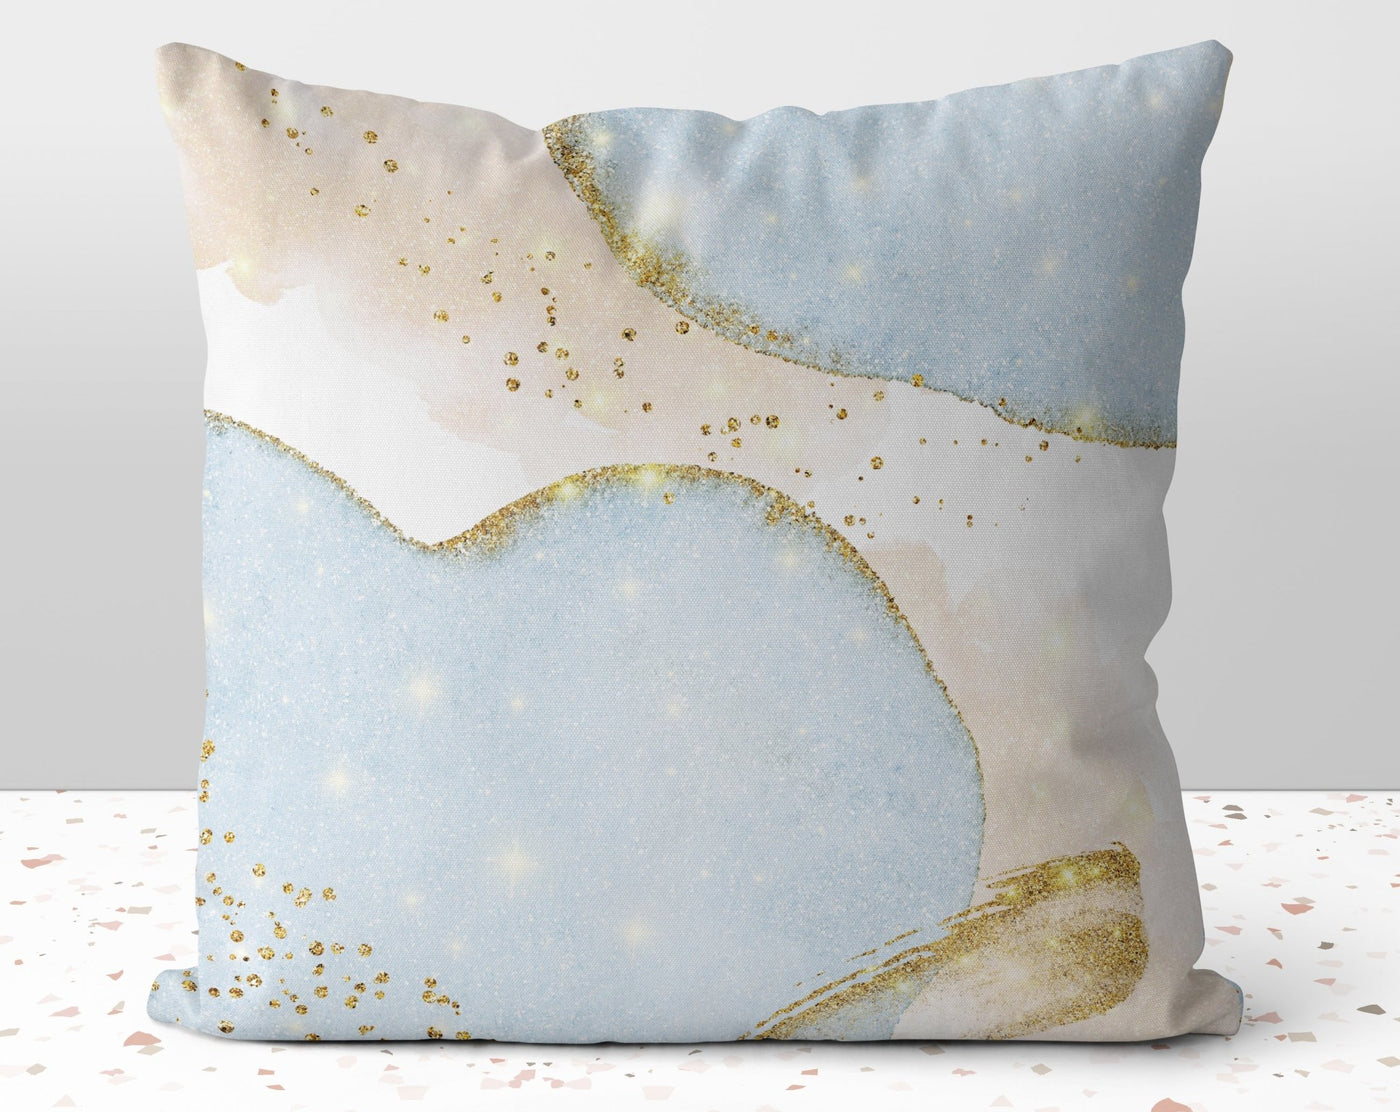 Blissful Chic Vanilla Blue with Gold Printed Accents Pillow Throw Cover with Insert - Cush Potato Pillows